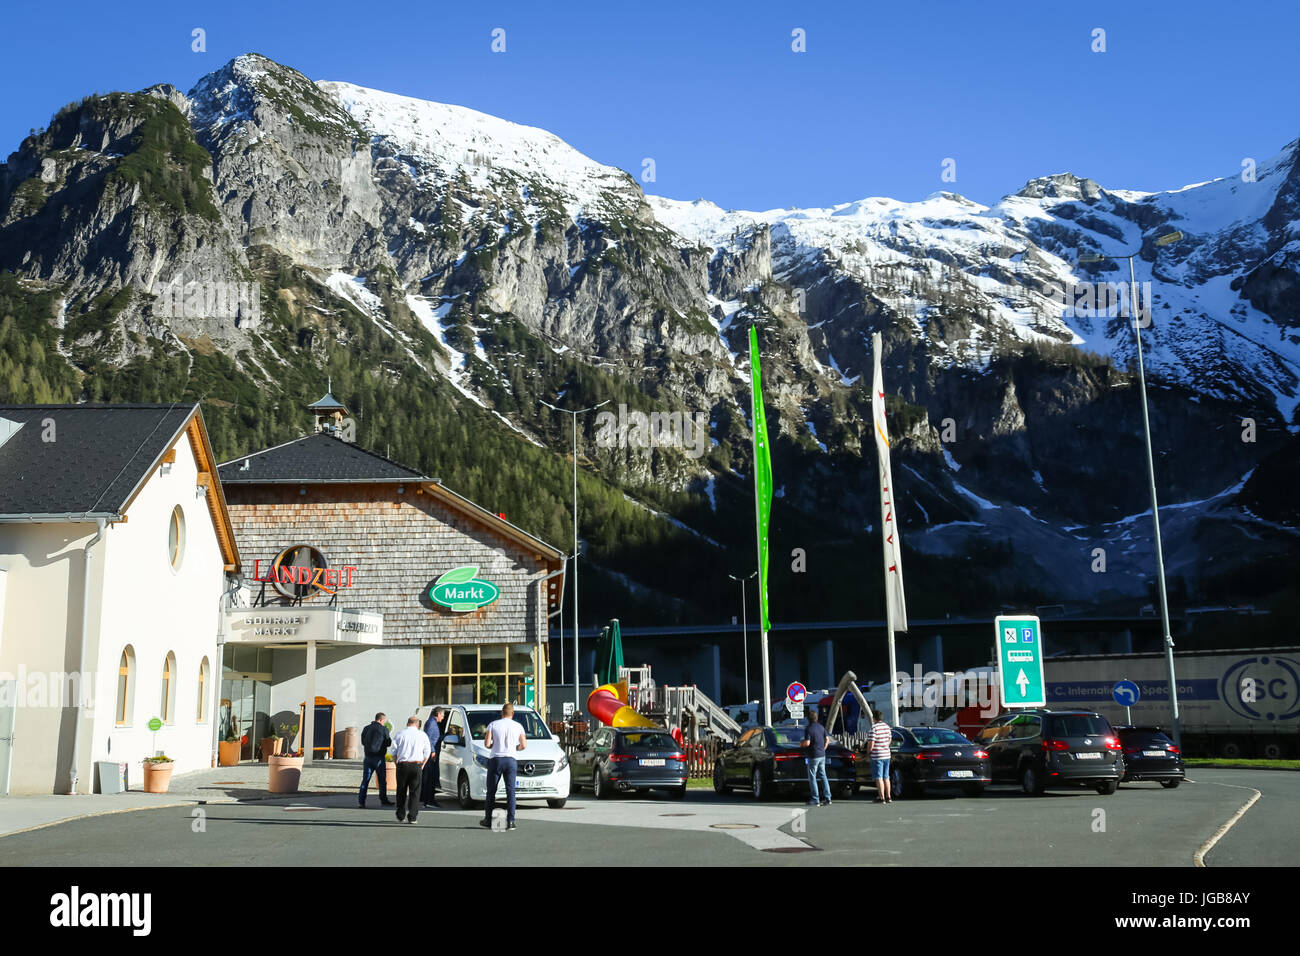 FLACHAU, AUSTRIA - MAY 10, 2017 : People at the highway rest stop with the Landzeit Tauernalm hotel and restaurant in Alps environment in Flachau, Aus Stock Photo